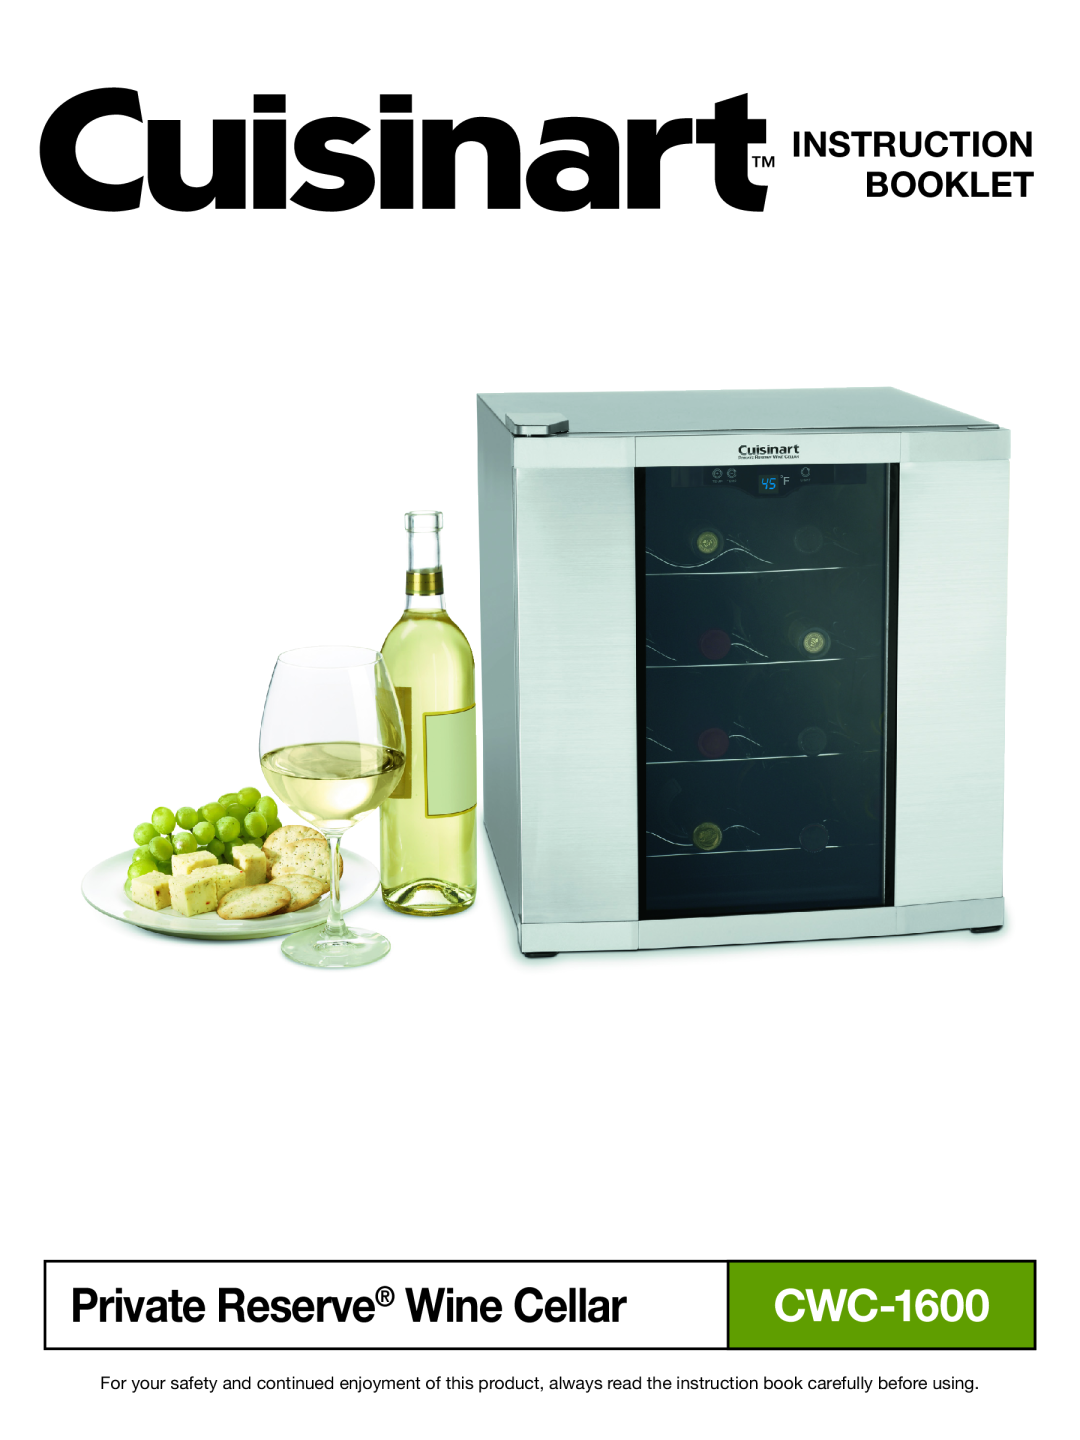 Cuisinart CWC-1600 manual Private Reserve Wine Cellar, Instruction Booklet 